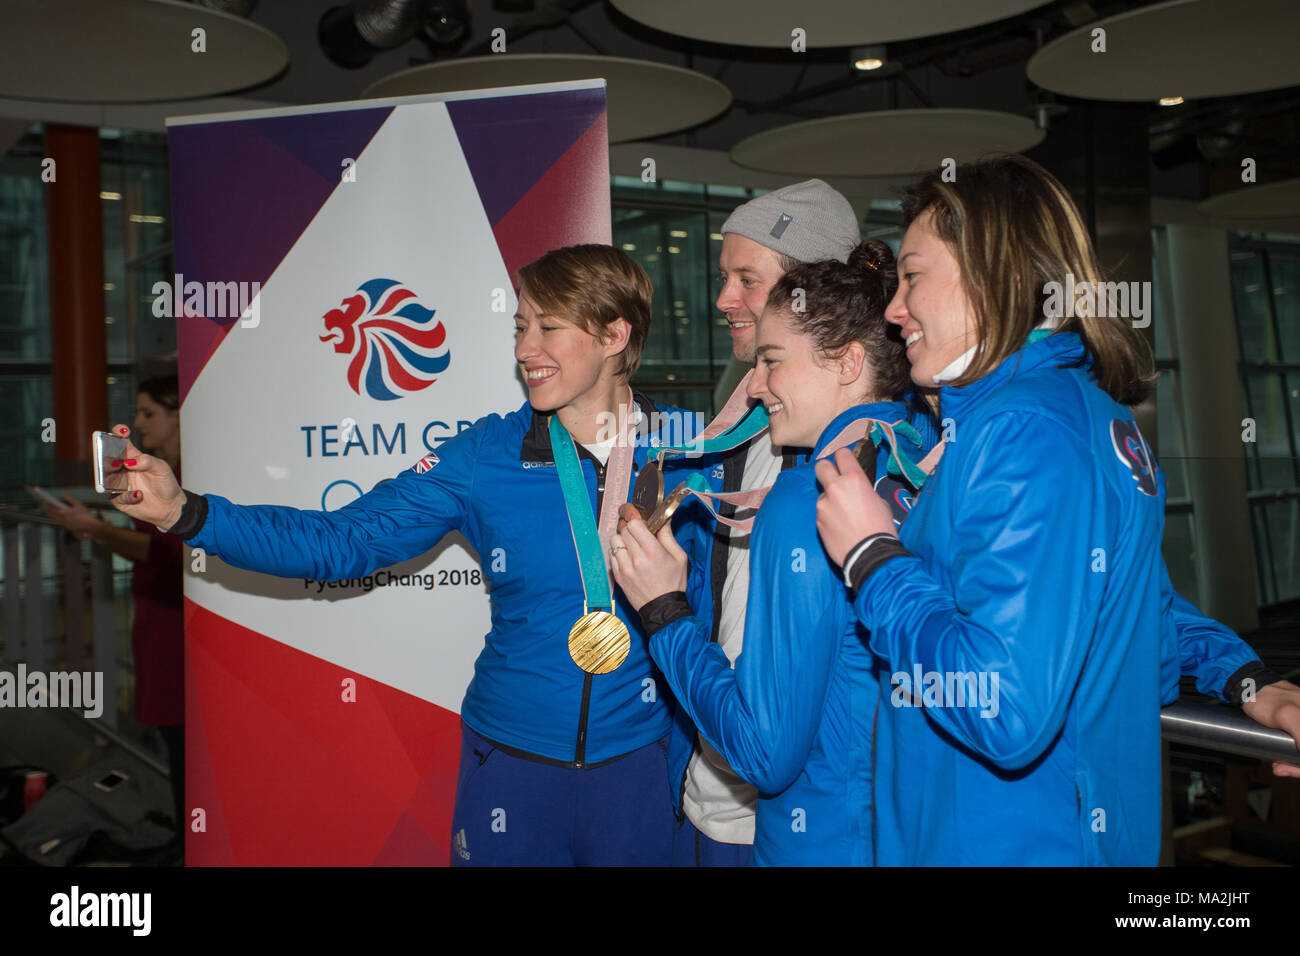 The British Olympic Association (BOA) welcome athletes home from the PyeongChang 2018 Olympic Winter Games in Korea.  Featuring: Lizzy Yarnold, Billy Morgan, Laura Deas, Izzy Atkin Where: London, England, United Kingdom When: 26 Feb 2018 Credit: Wheatley/WENN Stock Photo